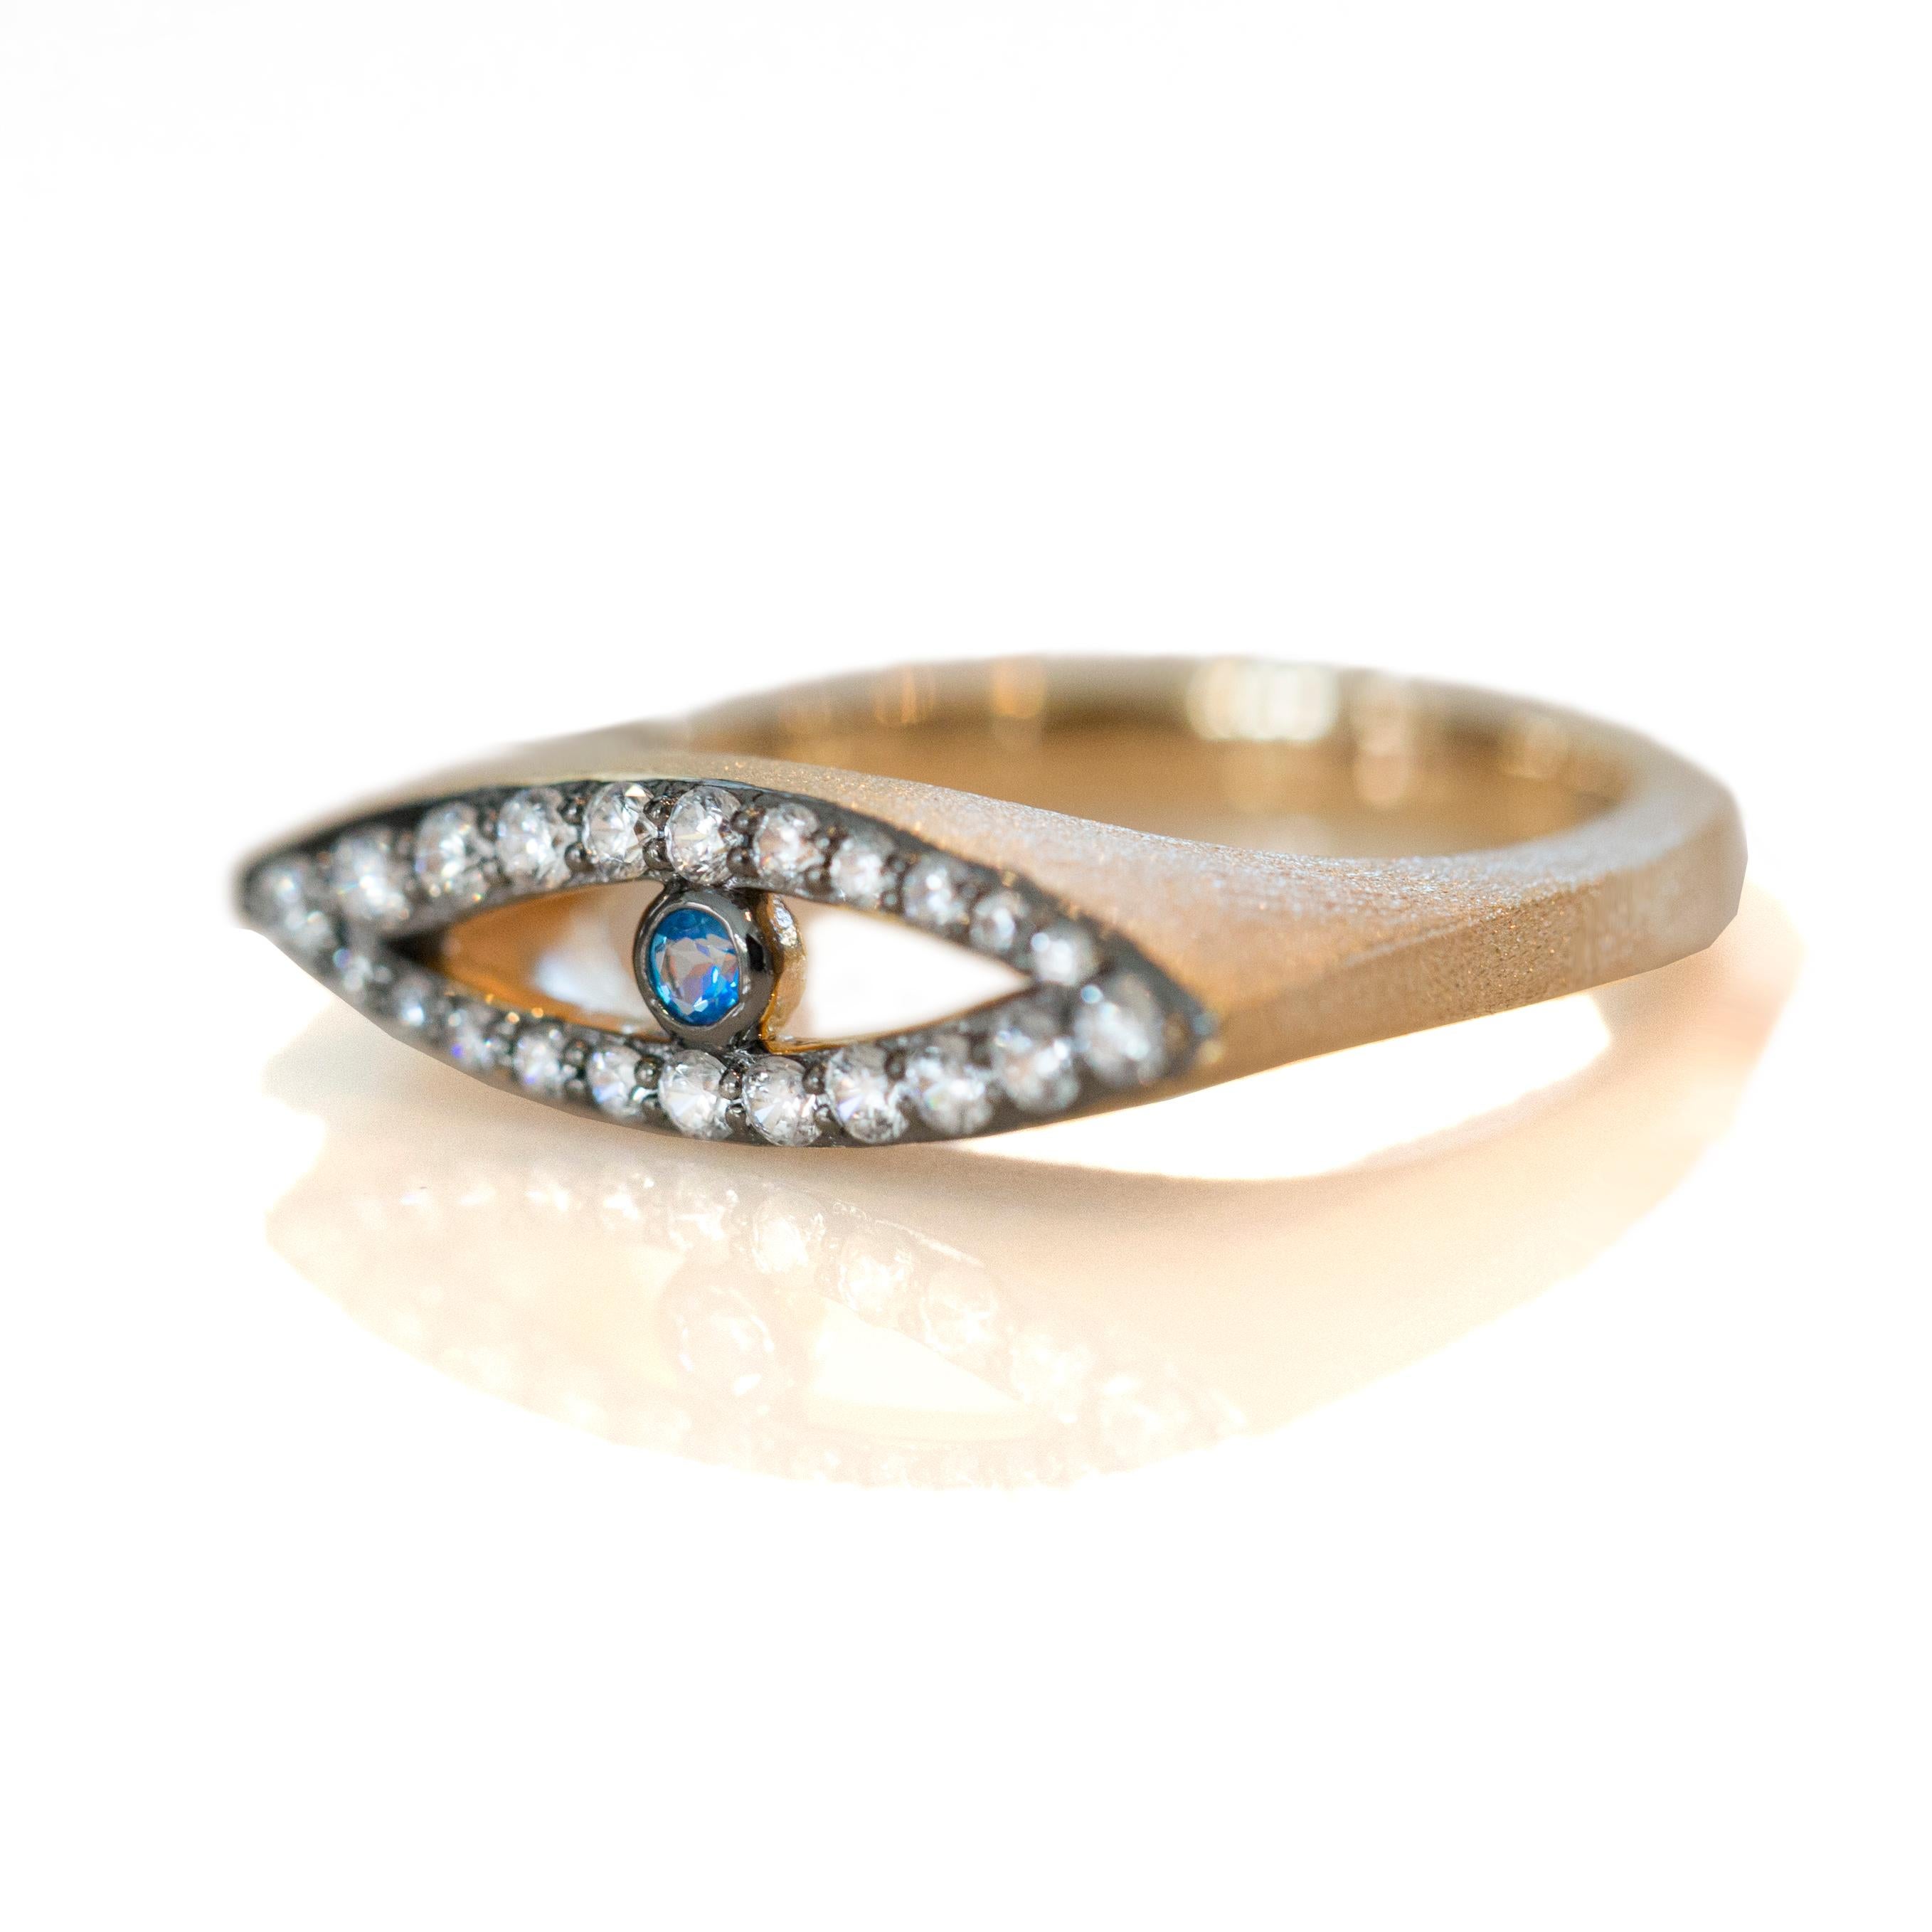 The eye symbol used across cultures for protection and wading away evil. Sa'mma protective eye ring is a reminder of the higher powers watching over us. Hand crafted of vermeil gold, clear zircon and blue topaz.